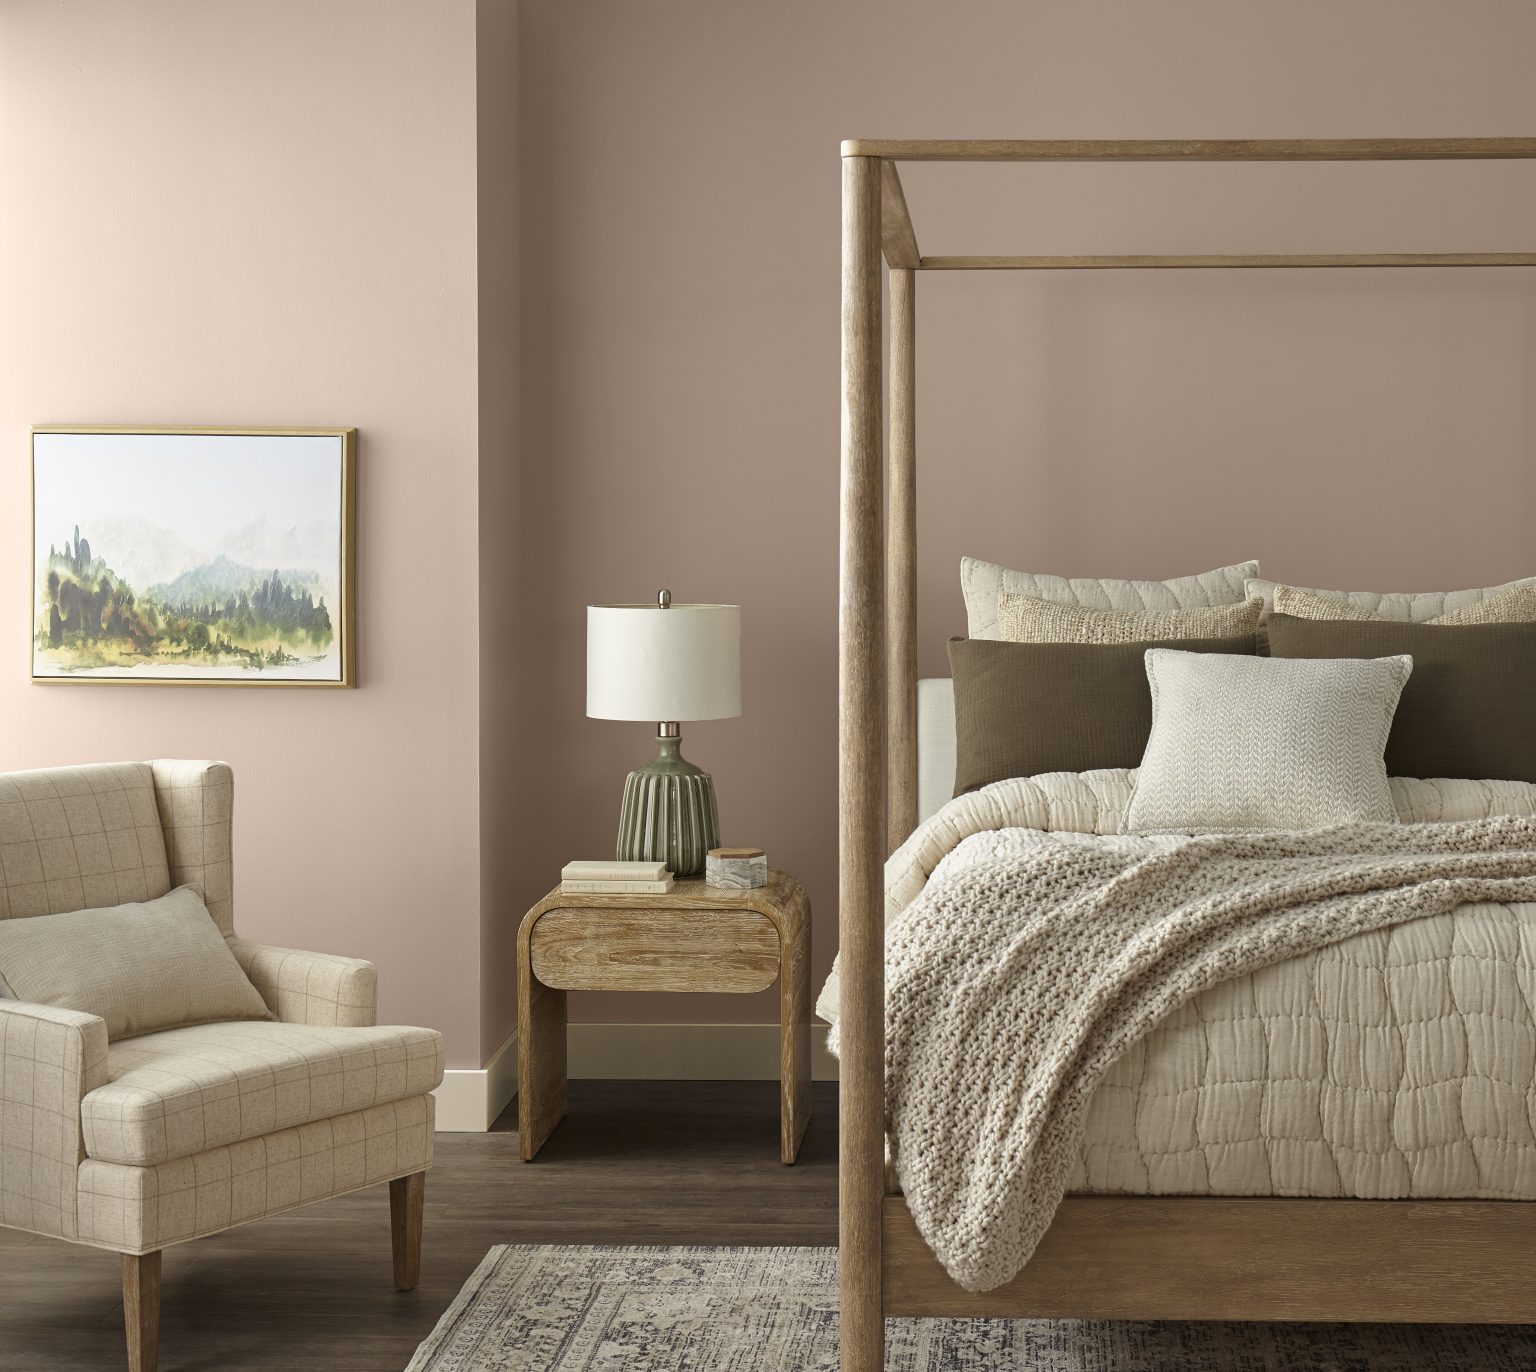 A bedroom with walls painted in a soft brown, styled with a canopy bed and armchair